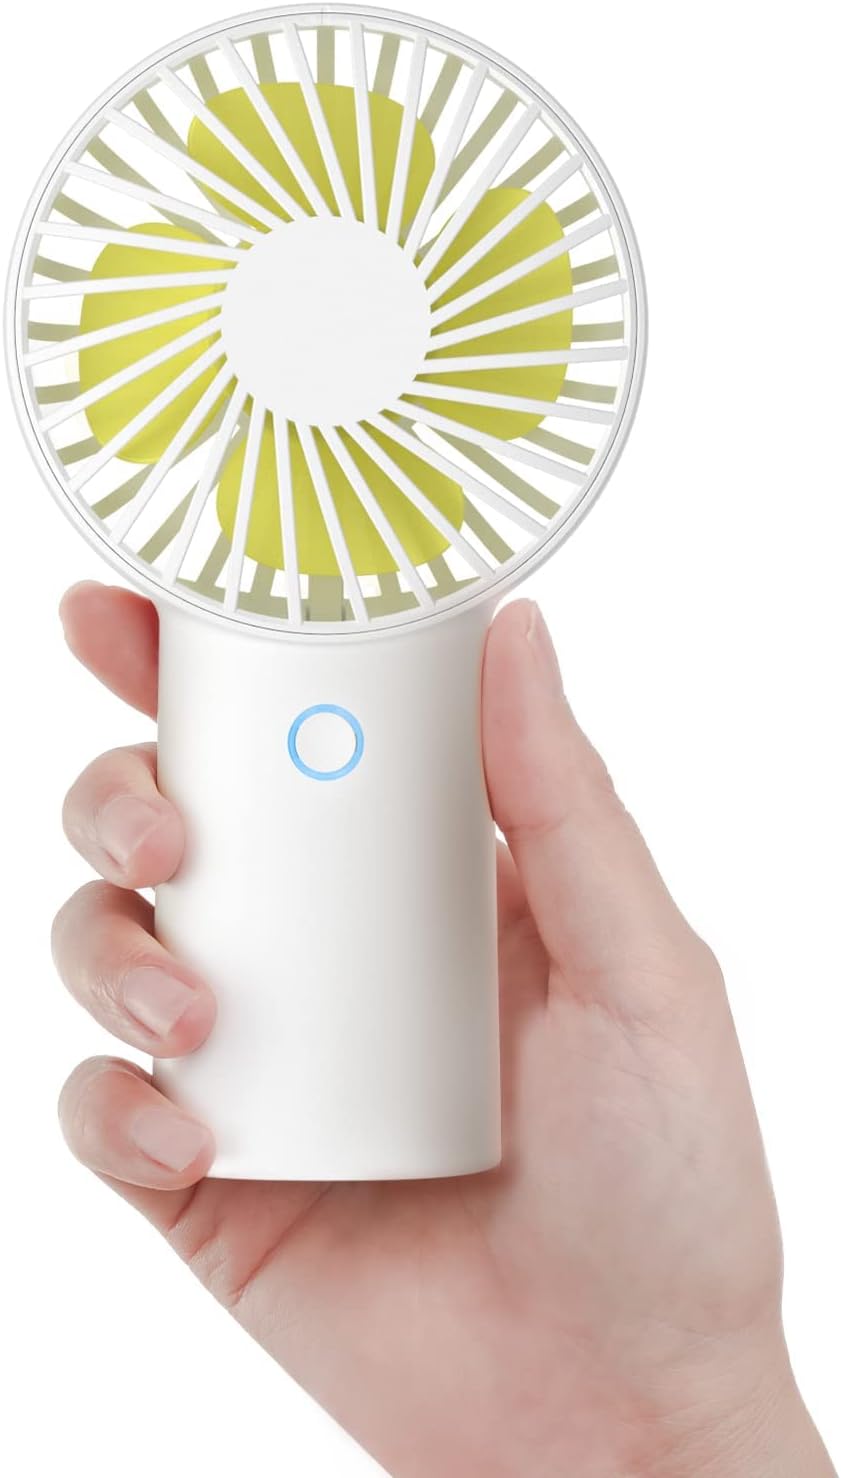 JISULIFE Handheld Portable Fan [20H Max Cooling Time] Mini Hand Fan, 4000mAh USB Rechargeable Personal Fan with 3 Speeds for Travel/Eyelash/Camping/Office, Ideal Gifts for Women, Men, Boys,Girls-White